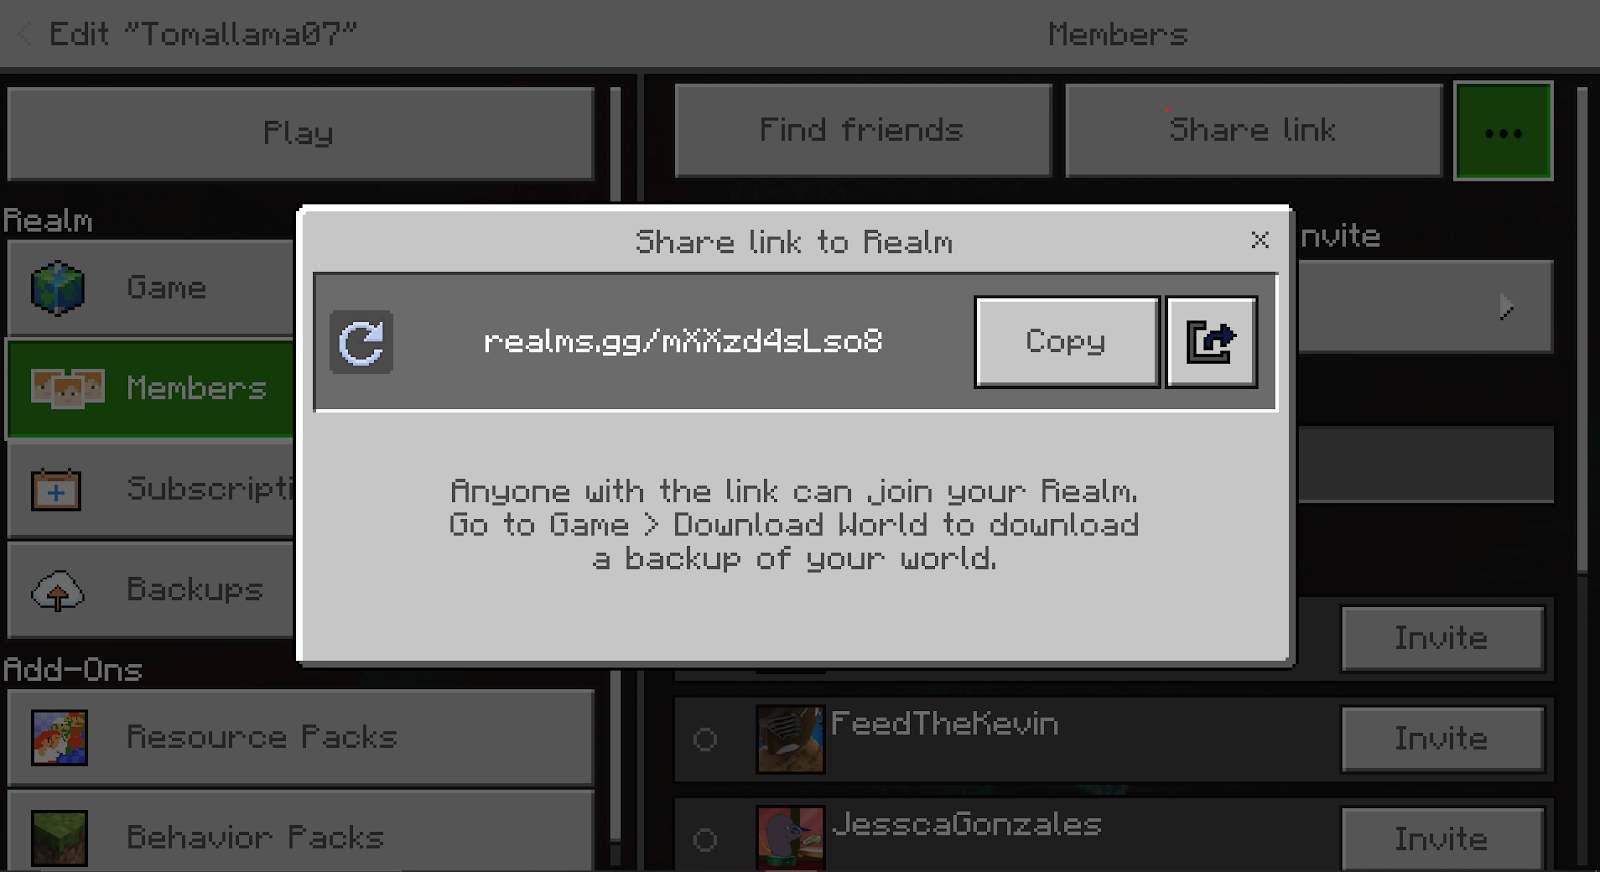 Share a link to realm